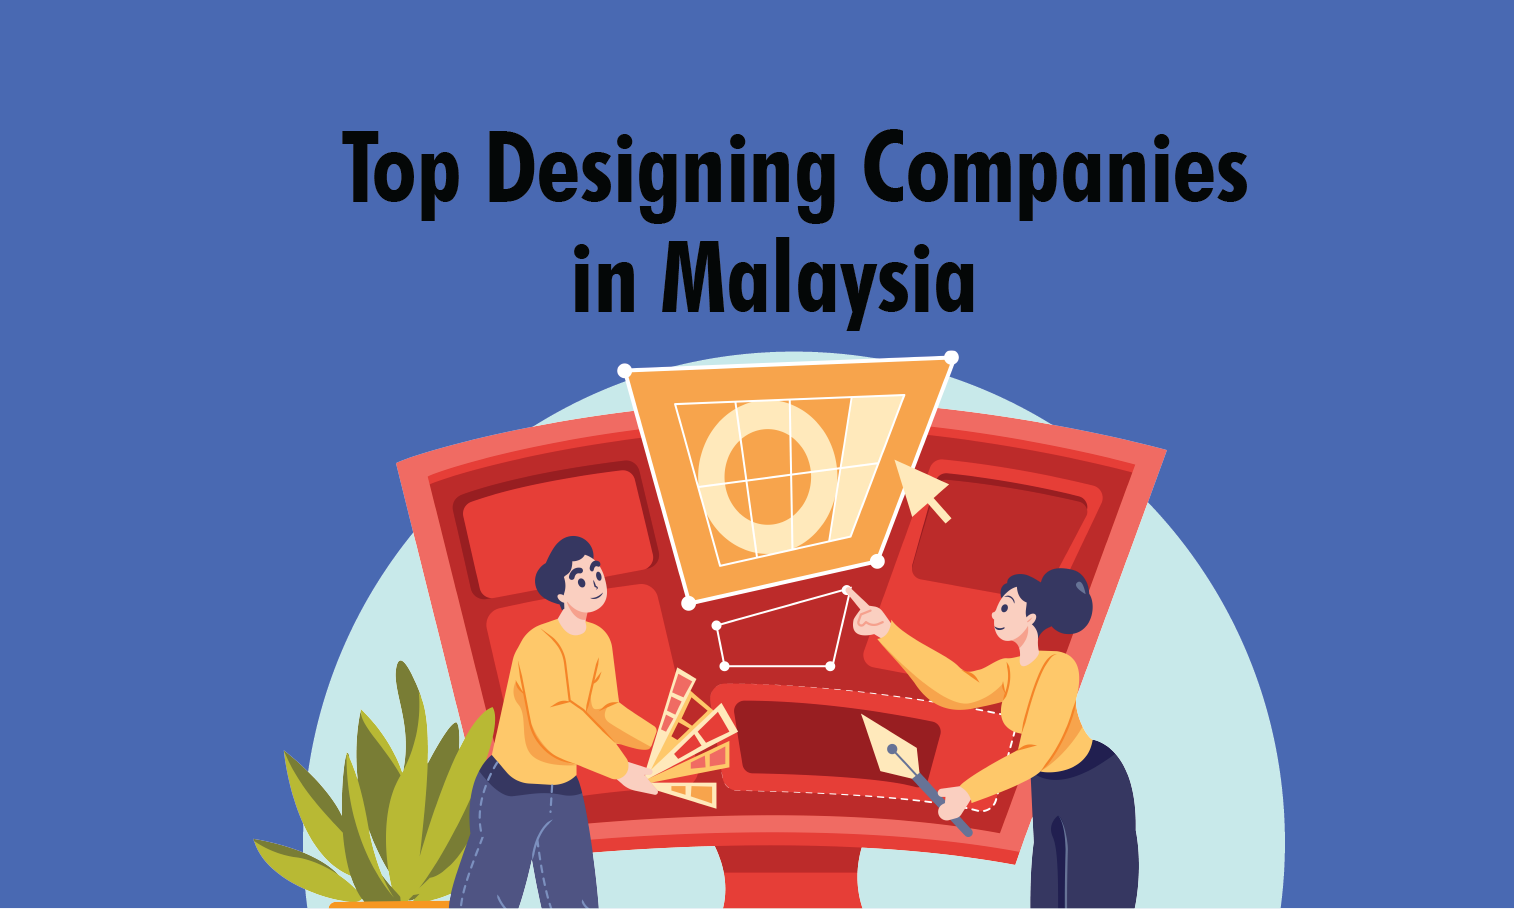 The Top 10 Designing Companies in Malaysia - Business Guide Malaysia